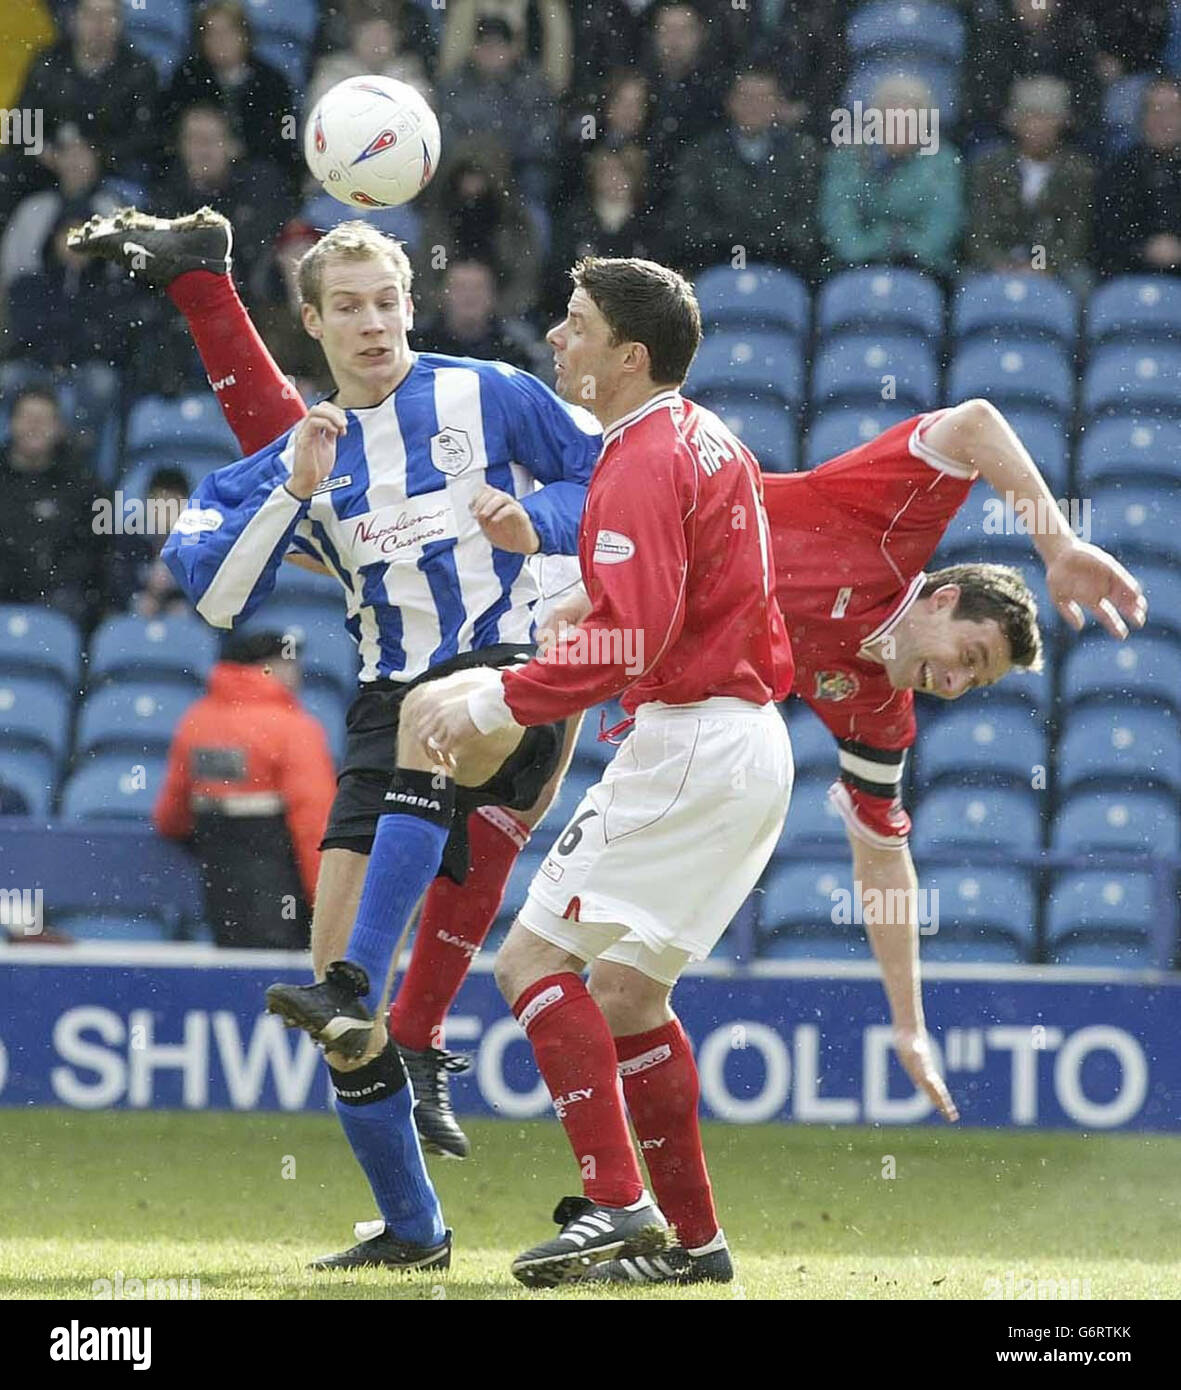 Sheffield Wednesday's Kim Olsen (L) tangles with Barnsley's Antony Kay (R) & Peter Handyside during the Nationwide Division Two match at Hillsborough, Sheffield. NO UNOFFICIAL CLUB WEBSITE USE. Stock Photo